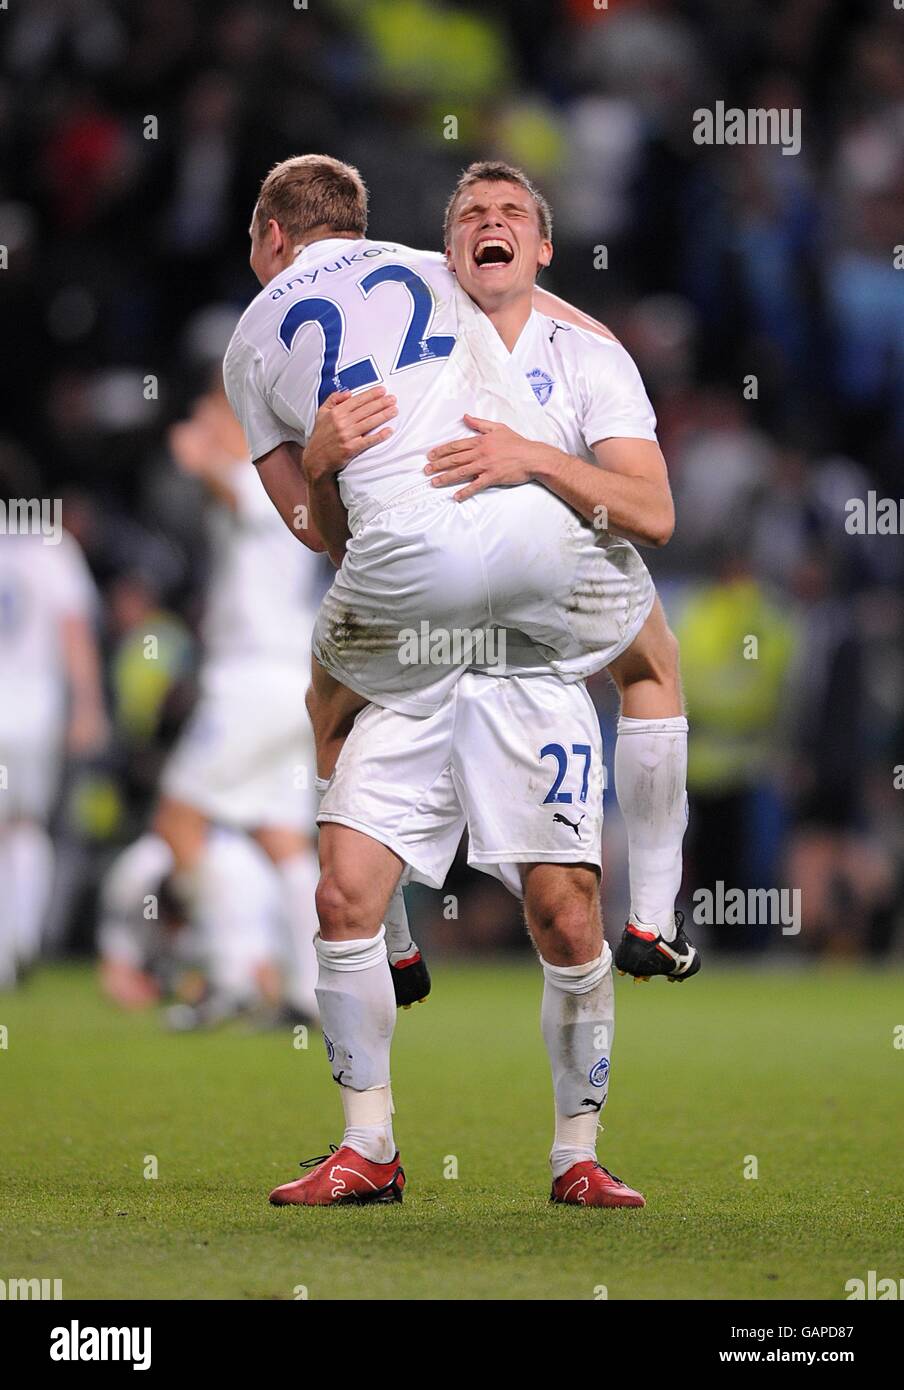 Soccer - UEFA Cup - Final - FC Zenit Saint Petersburg v Rangers - City Of Manchester Stadium. Zenit St Petersburgs' Aleksandr Aniukov (22) and Igor Denisov celebrate victory after the final whistle Stock Photo